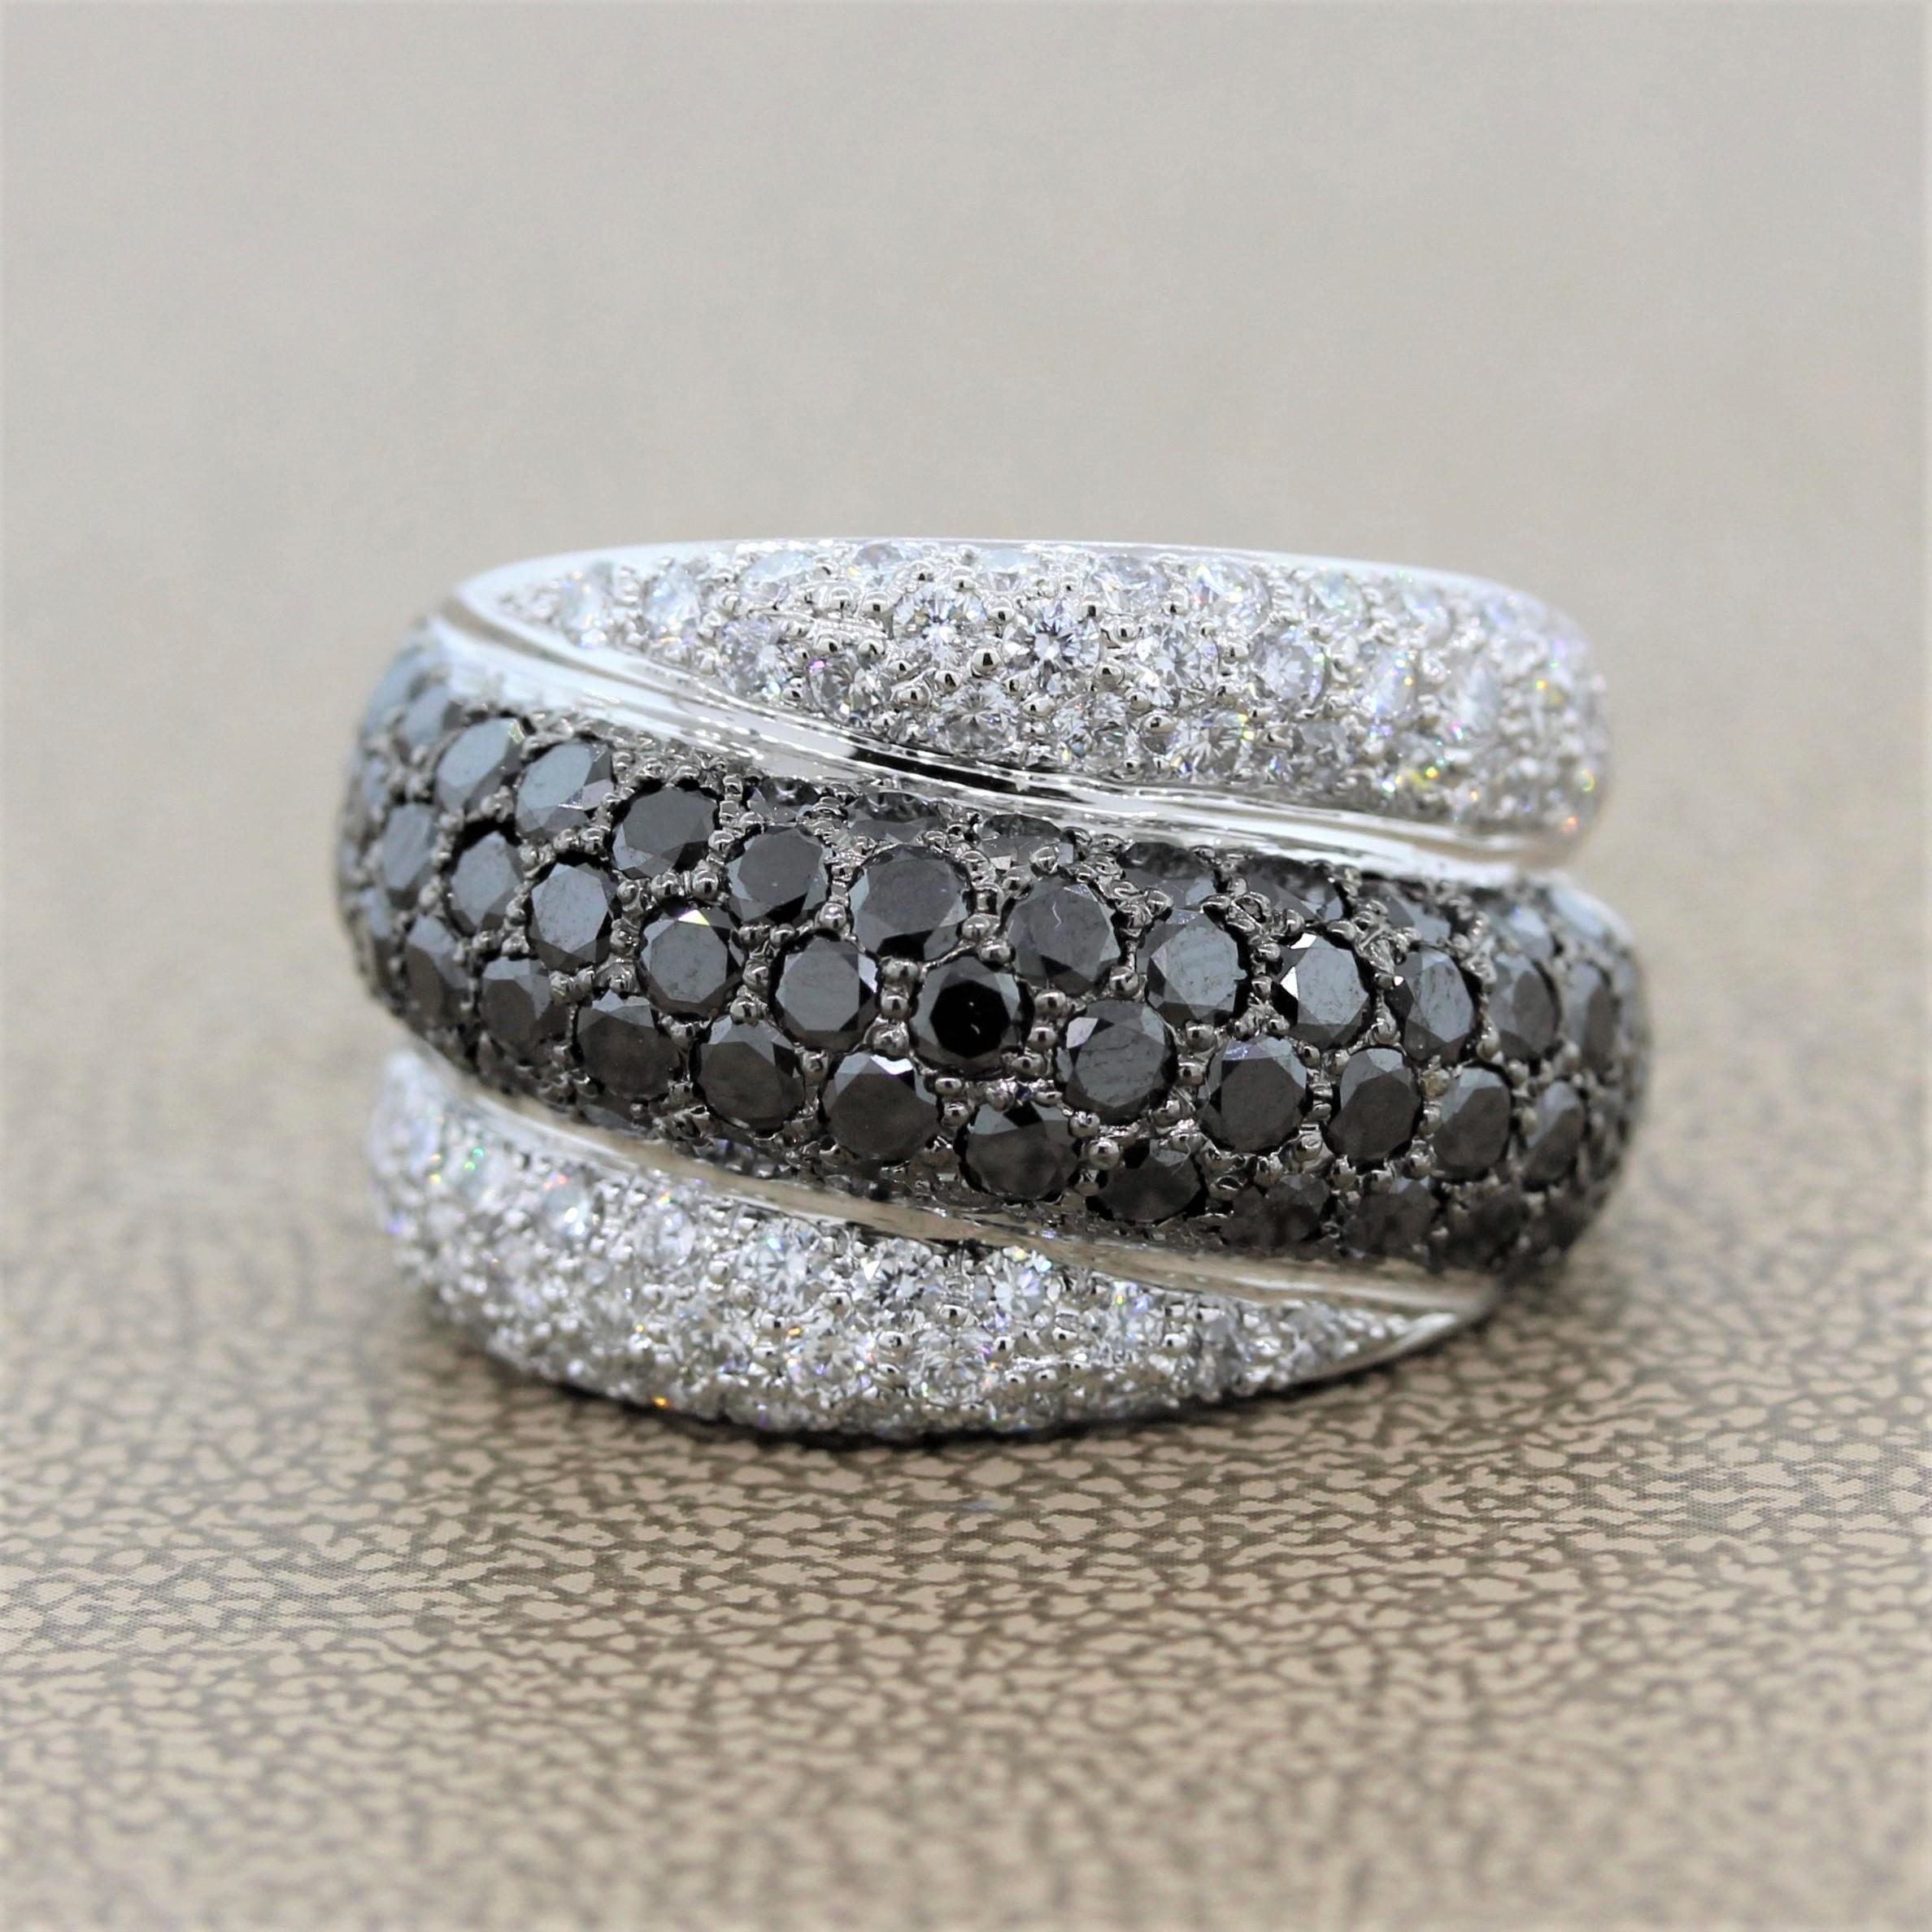 A bold ring featuring 4.31 carats of black diamonds and colorless diamonds in an 18K white gold setting. A strip of round cut black diamonds prong set with black rhodium runs along the center of the band with two stripes of round cut colorless